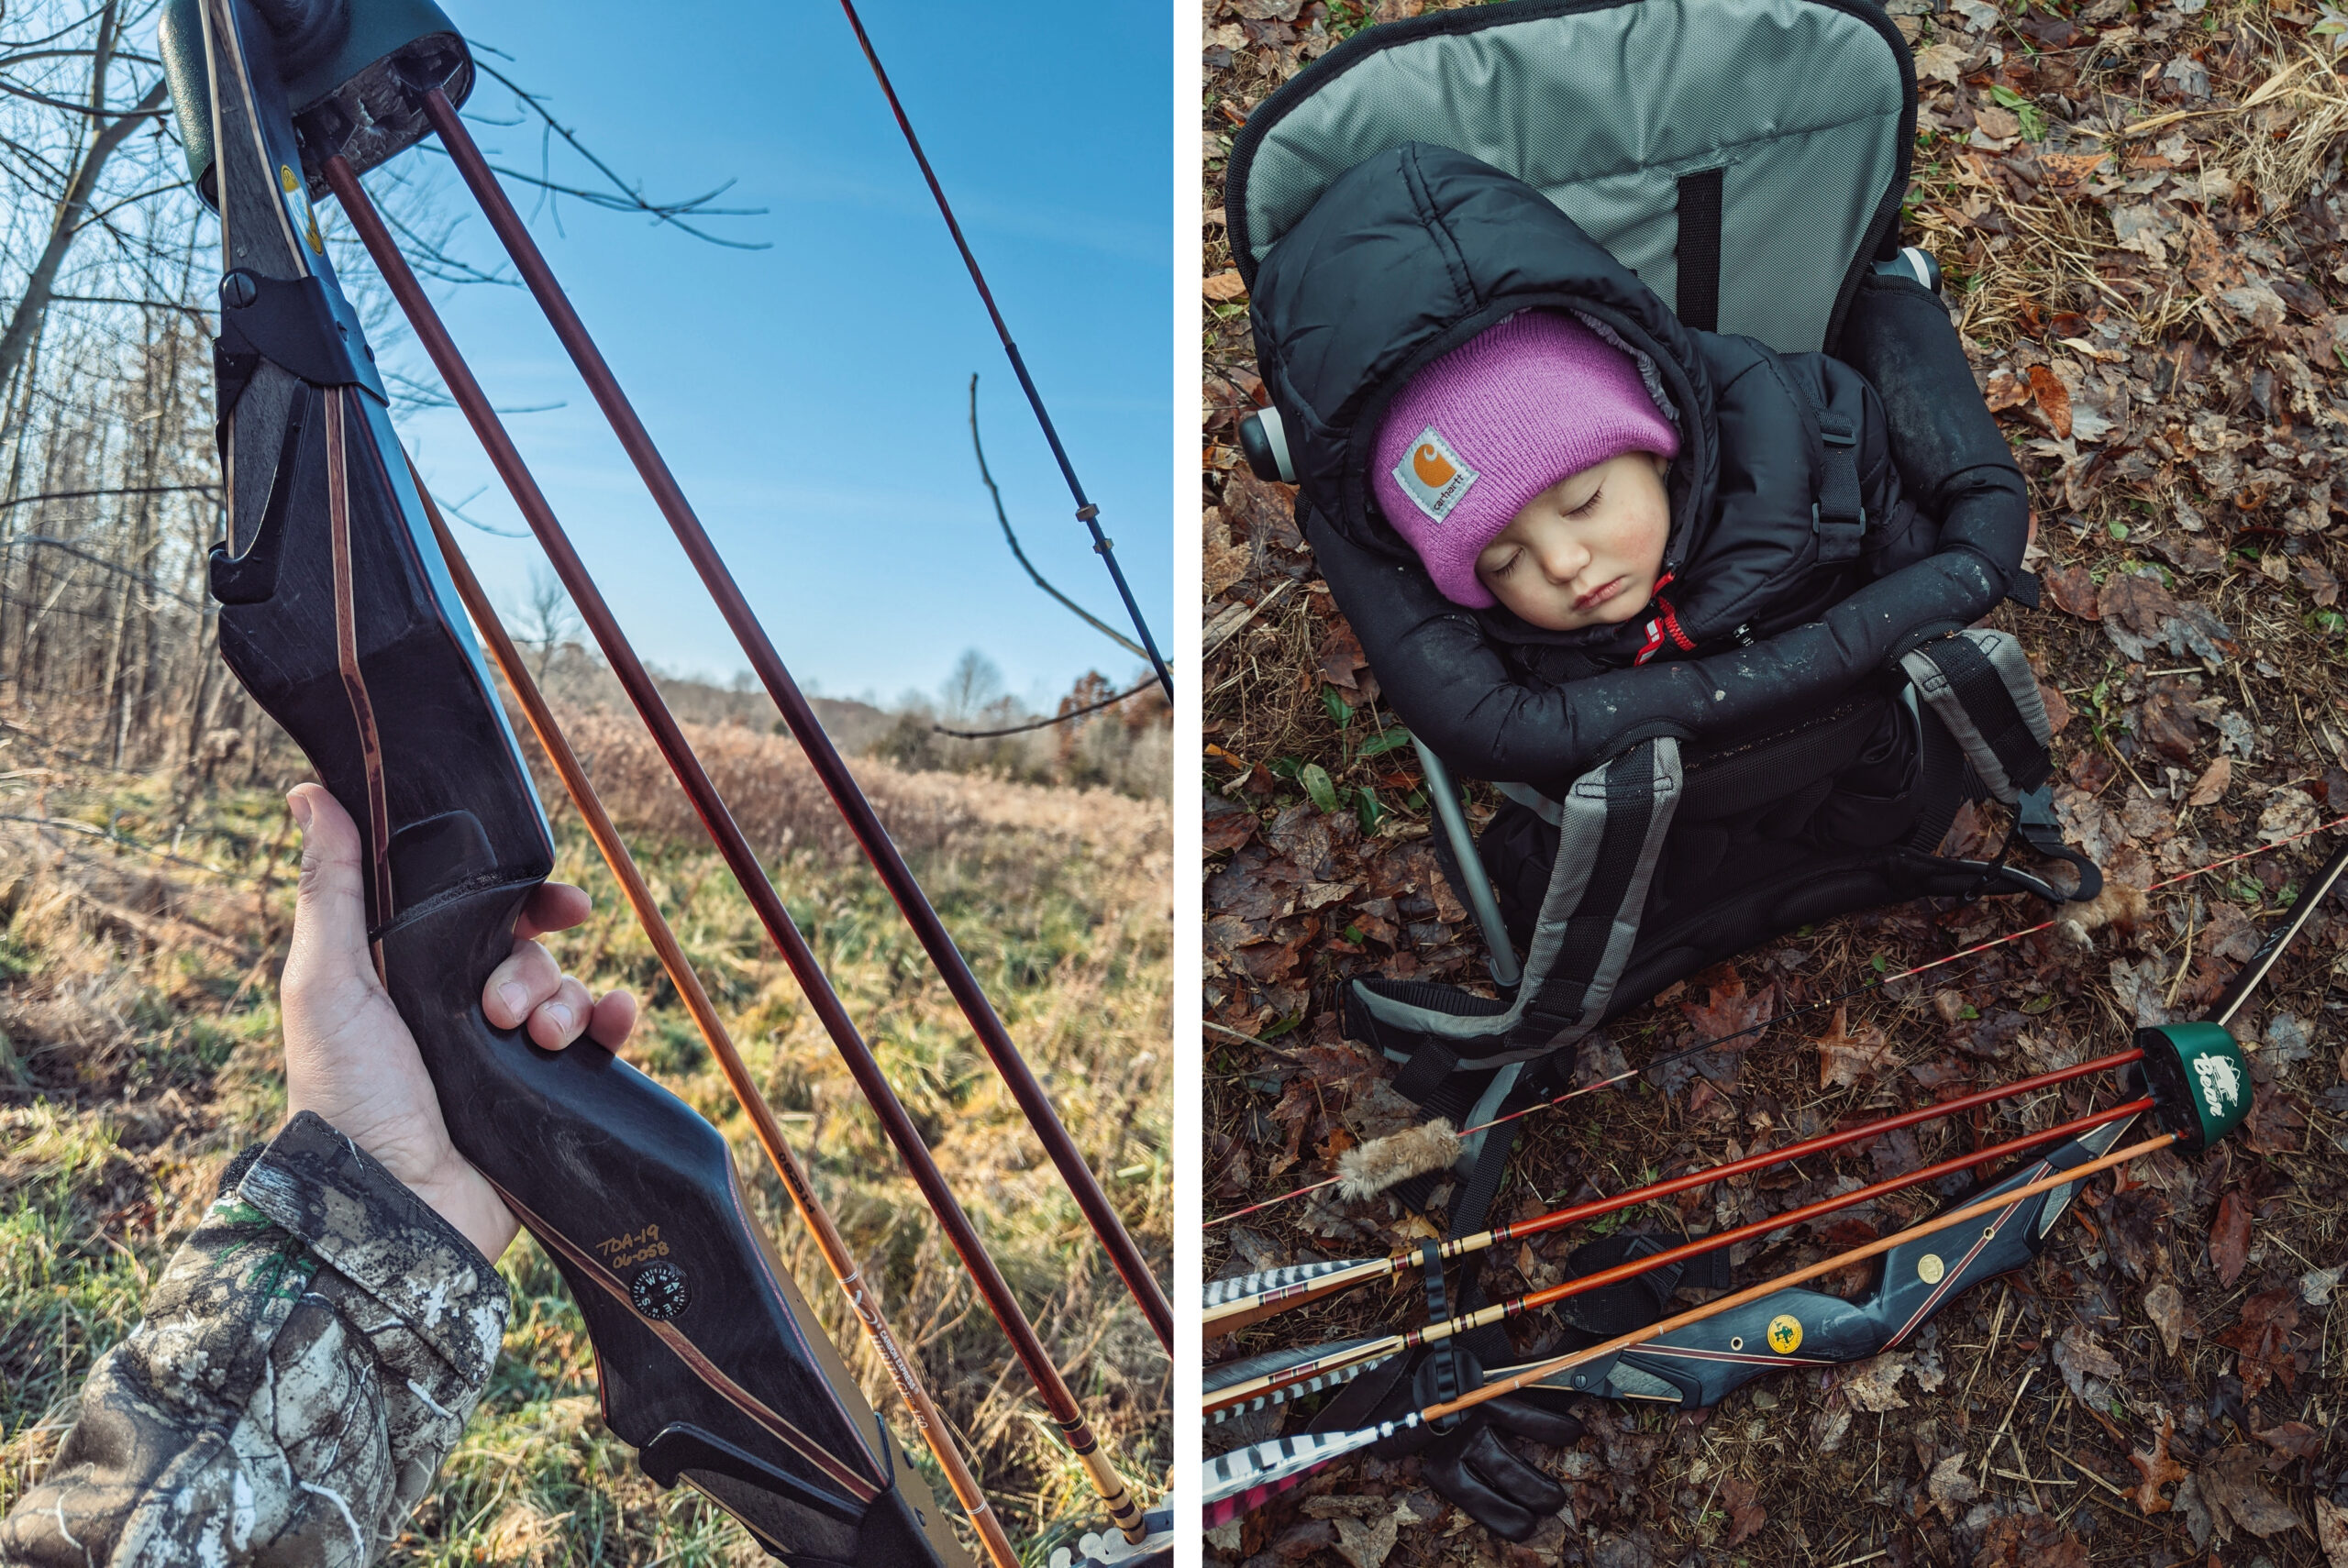 A hand holds up the dark wooden riser of a recurve bow beside a sleeping toddler in a backpack carrier set in the leaves.